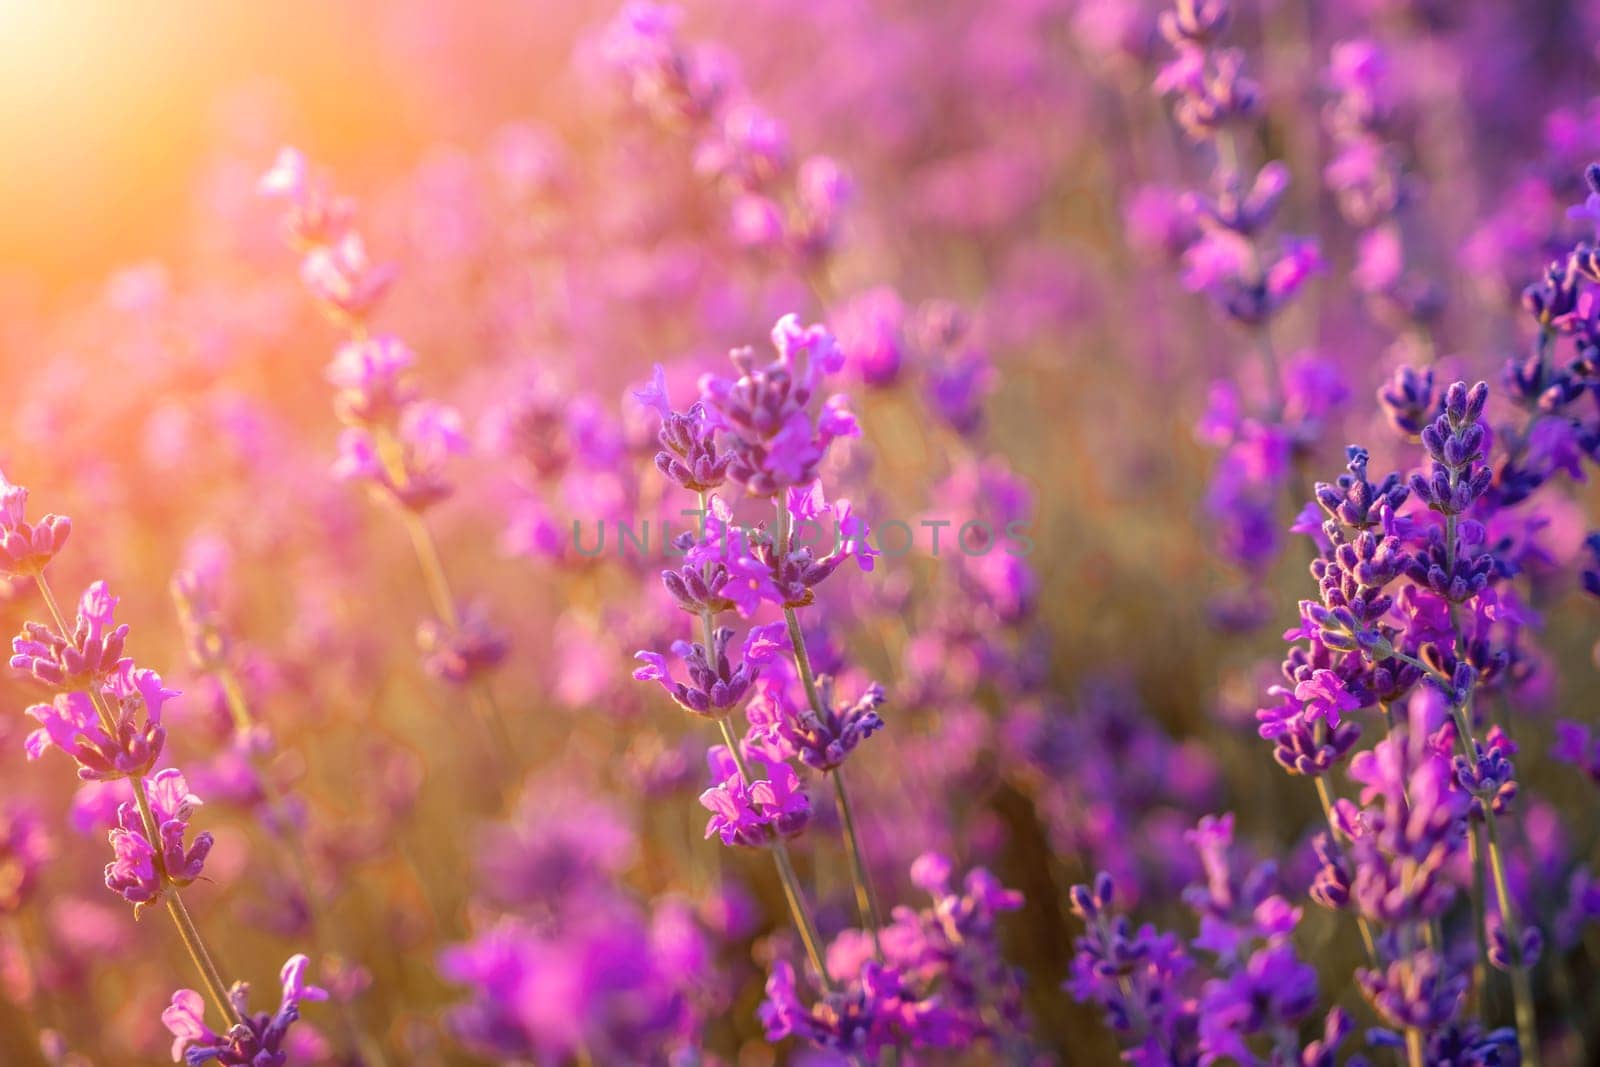 Lavender flower field closeup on sunset, fresh purple aromatic flowers for natural background. Design template for lifestyle illustration. Violet lavender field in Provence, France. by panophotograph